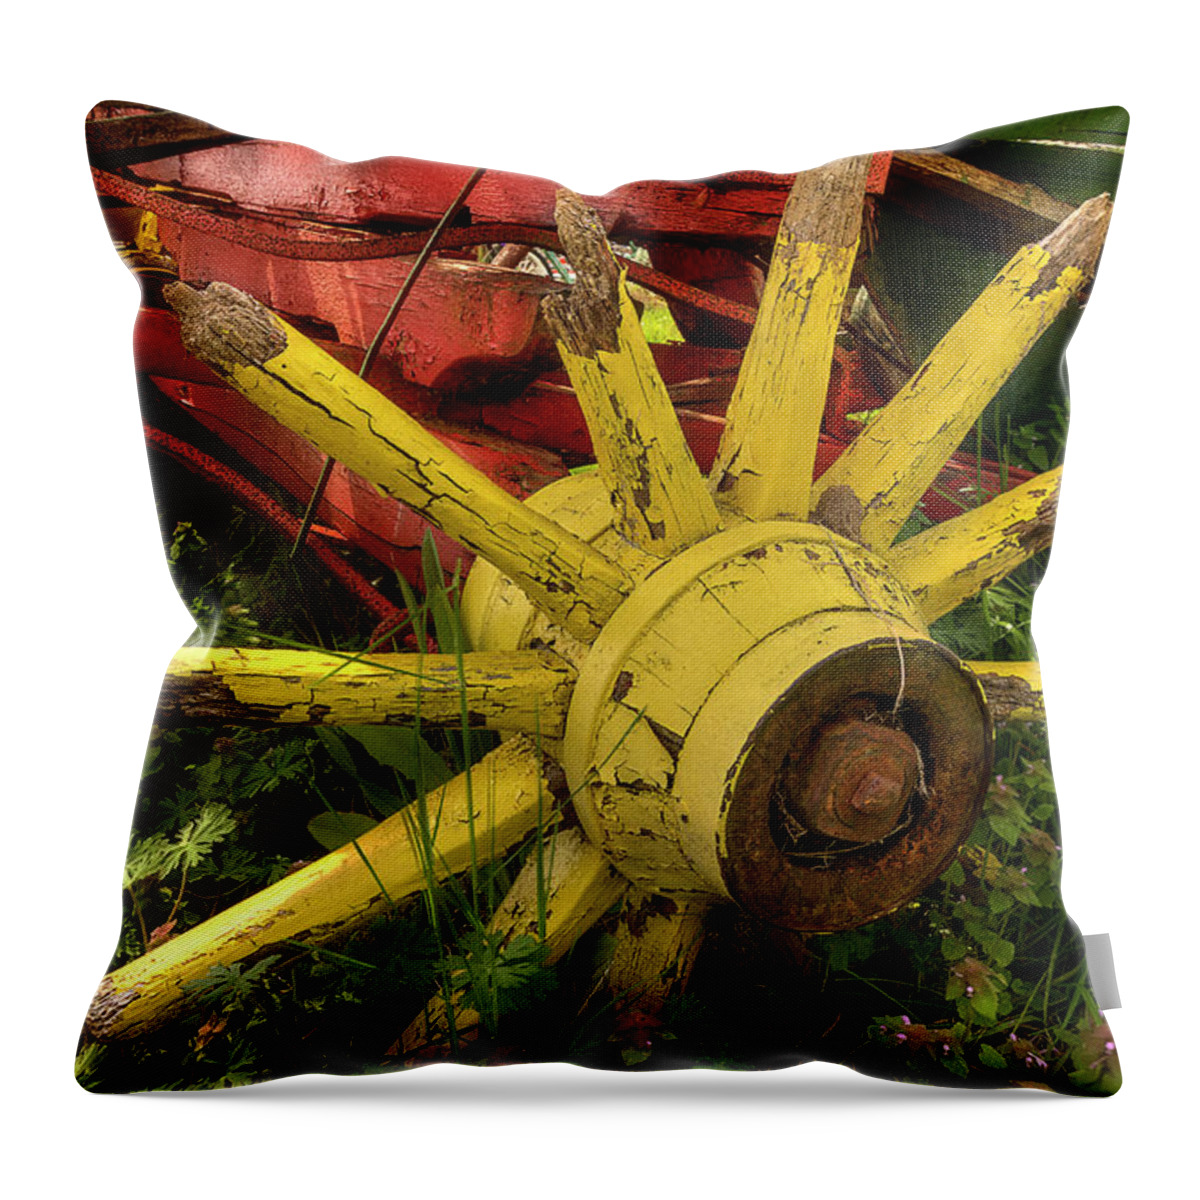 Wagon Throw Pillow featuring the photograph Broken Down by Mike Eingle